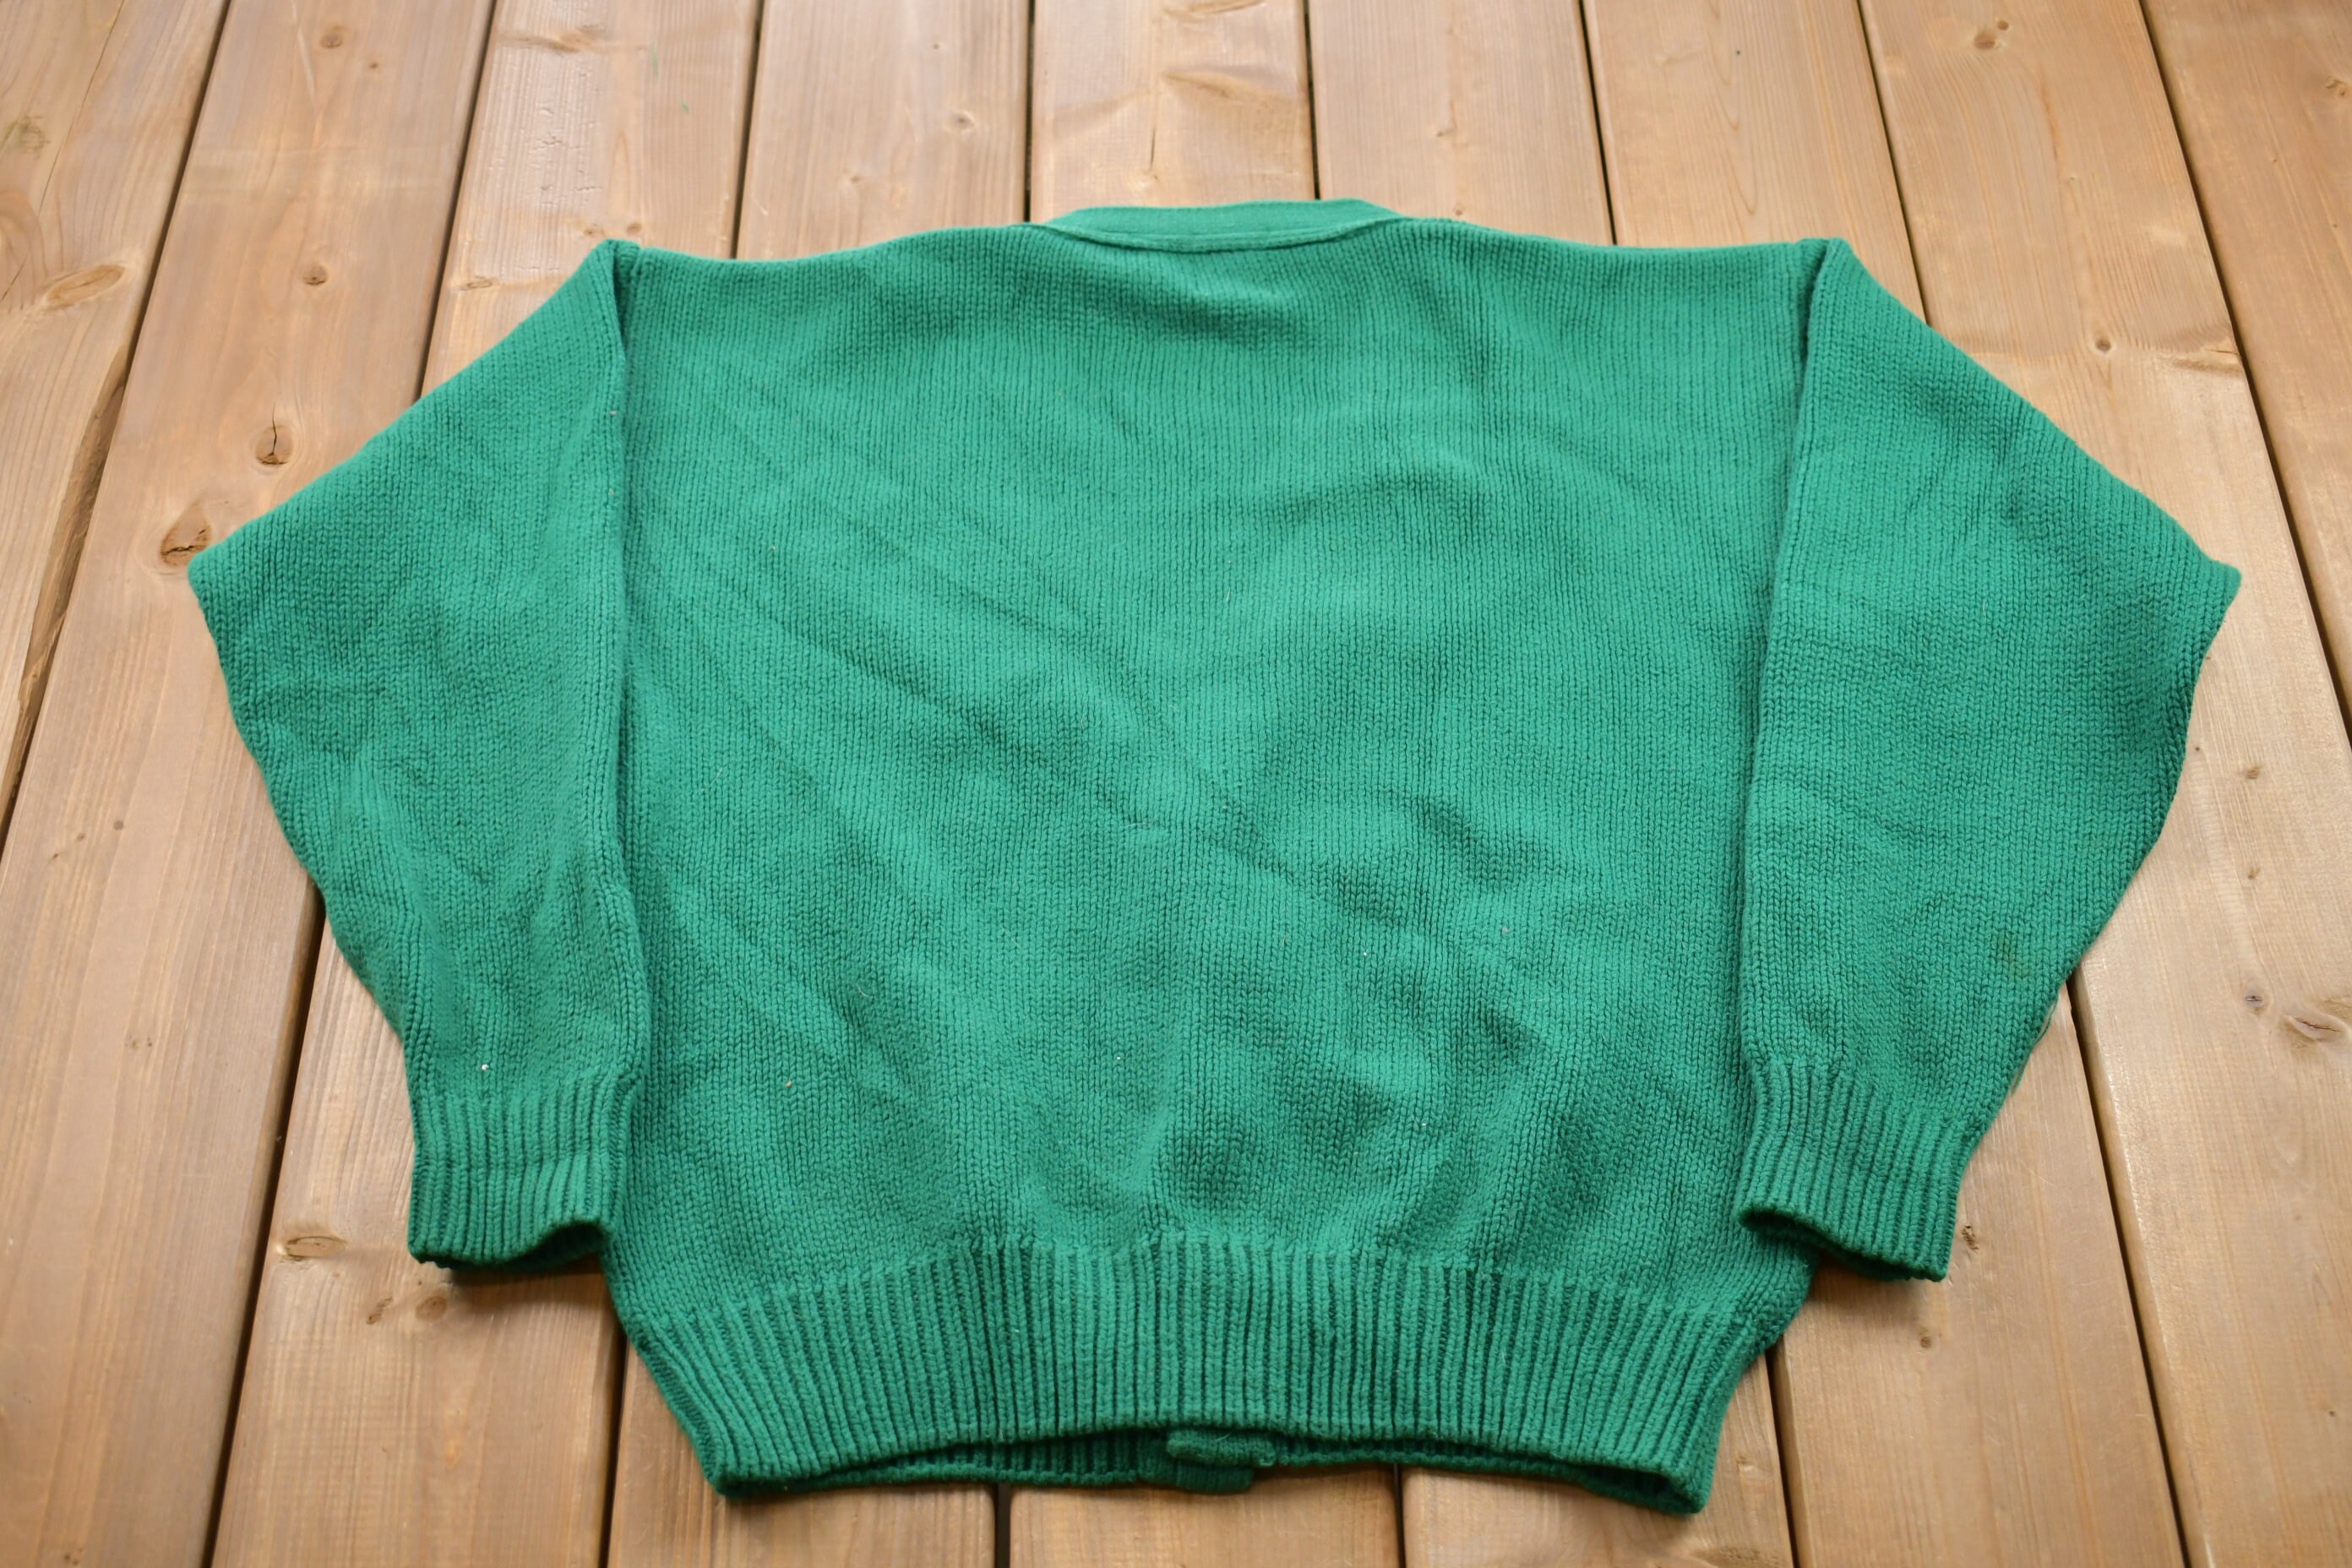 Vintage 1990s Gap Green Knitted Cardigan Sweater / Vintage - Etsy